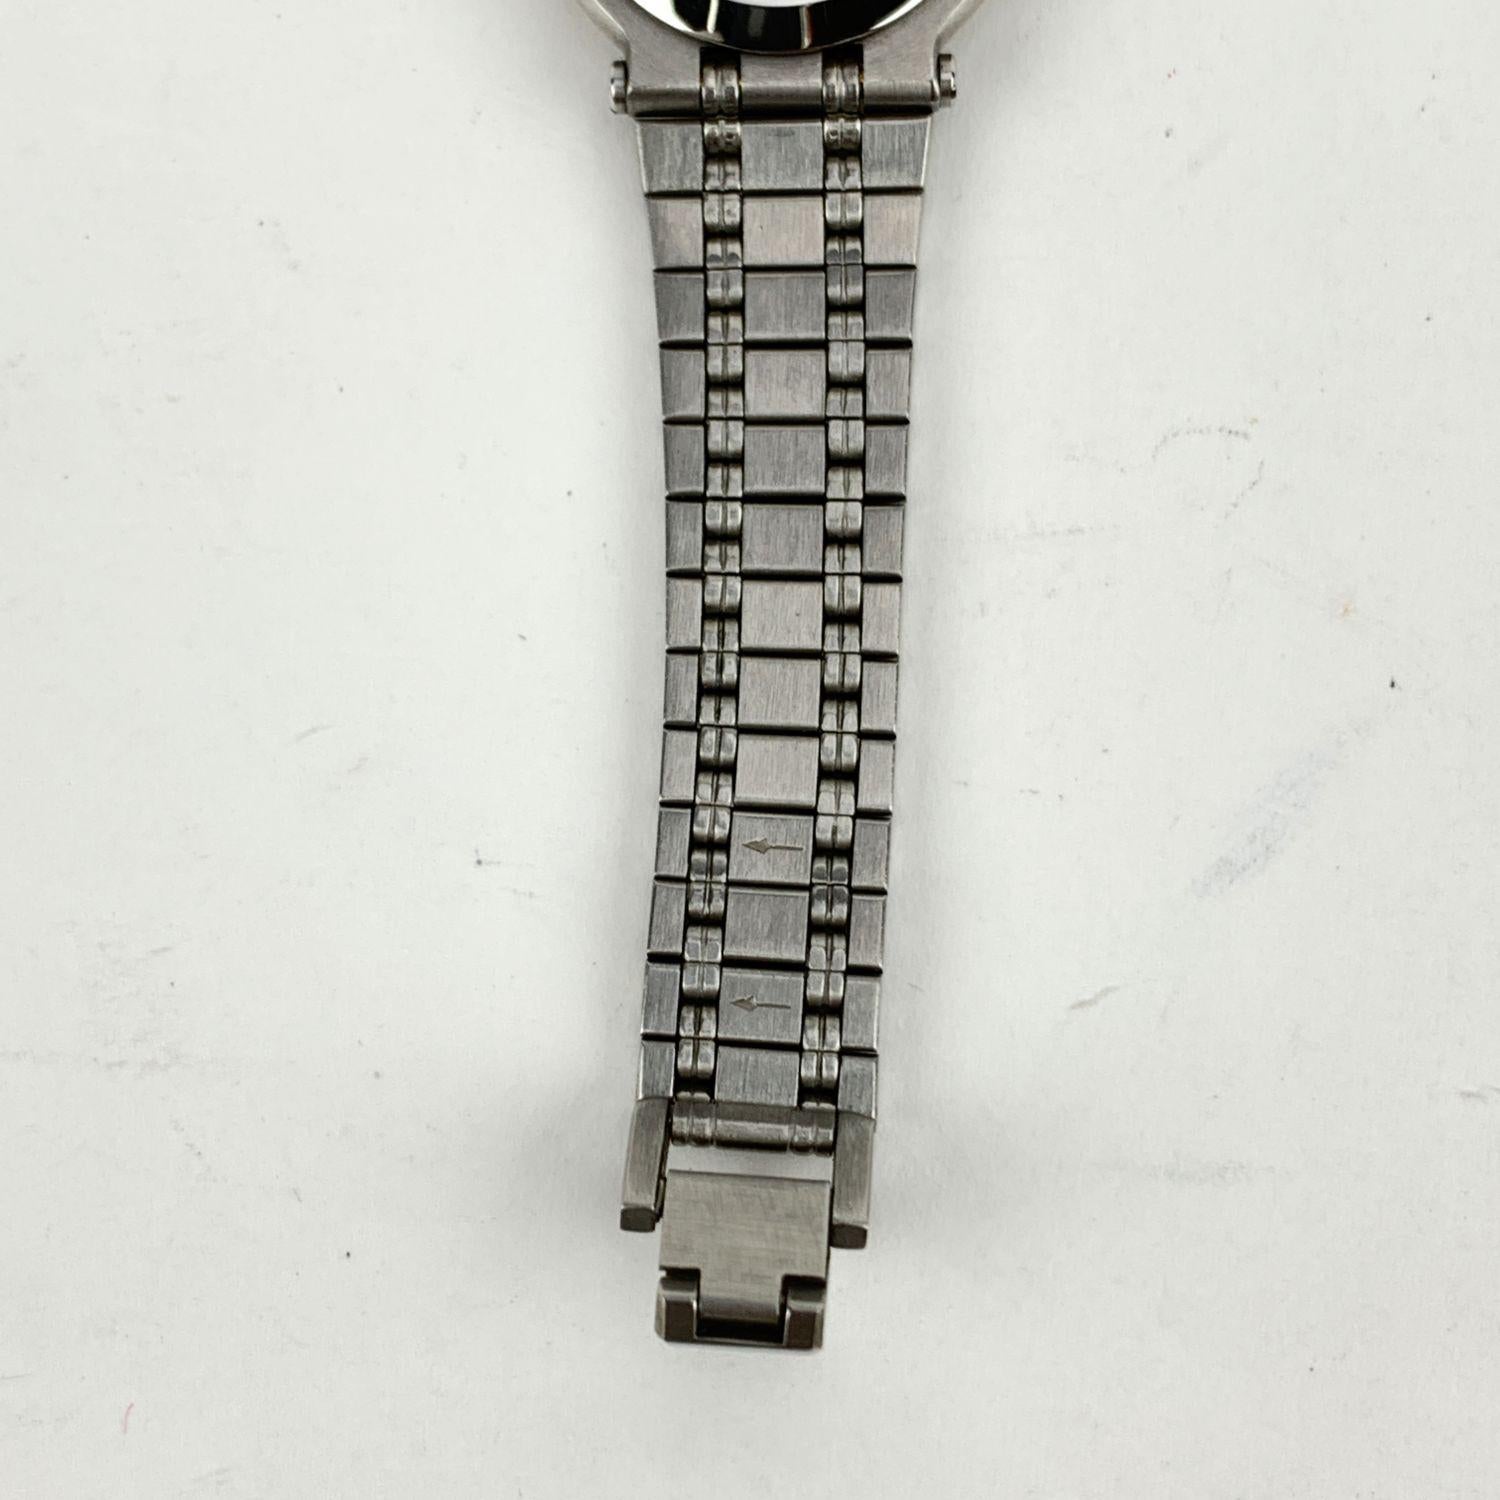 Gucci Vintage Stainless Steel Mod 9100 L Wrist Watch Black Dial 2